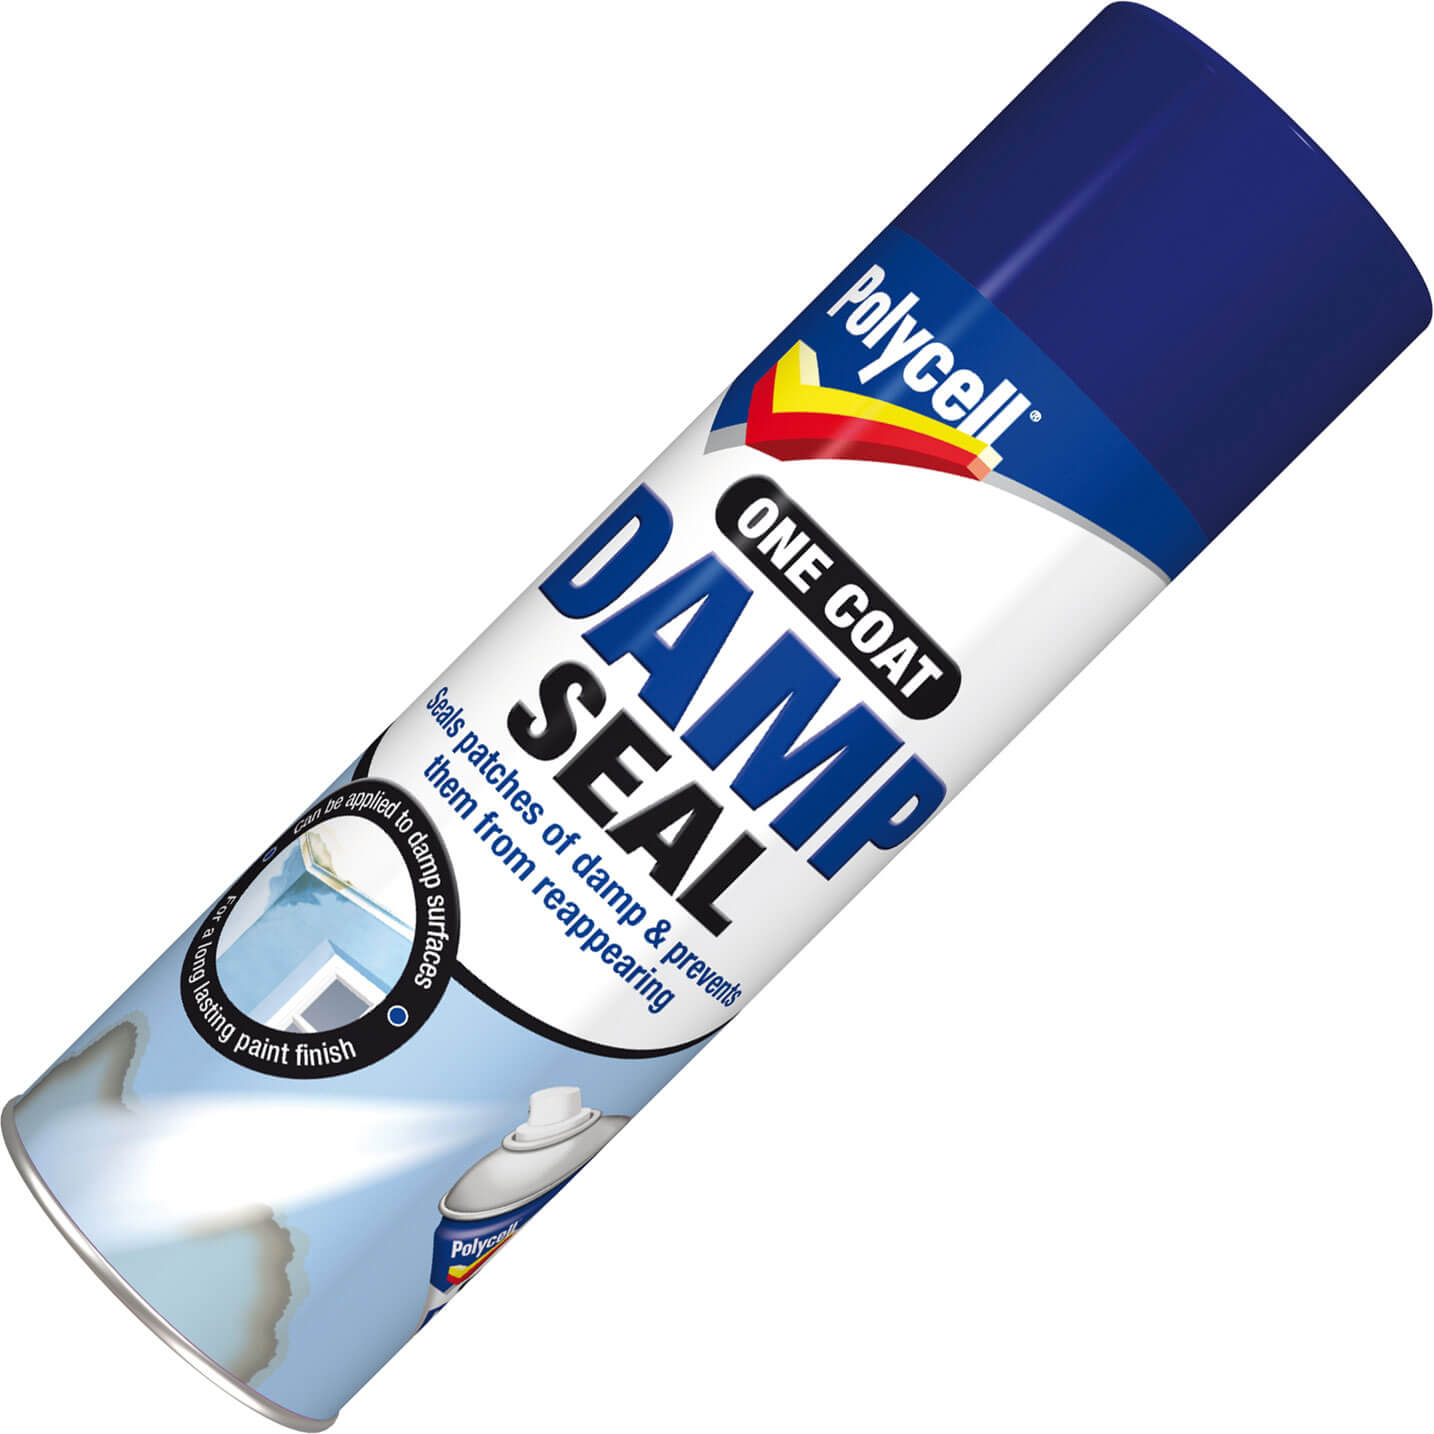 Image of Polycell Damp Seal Aerosol 500ml